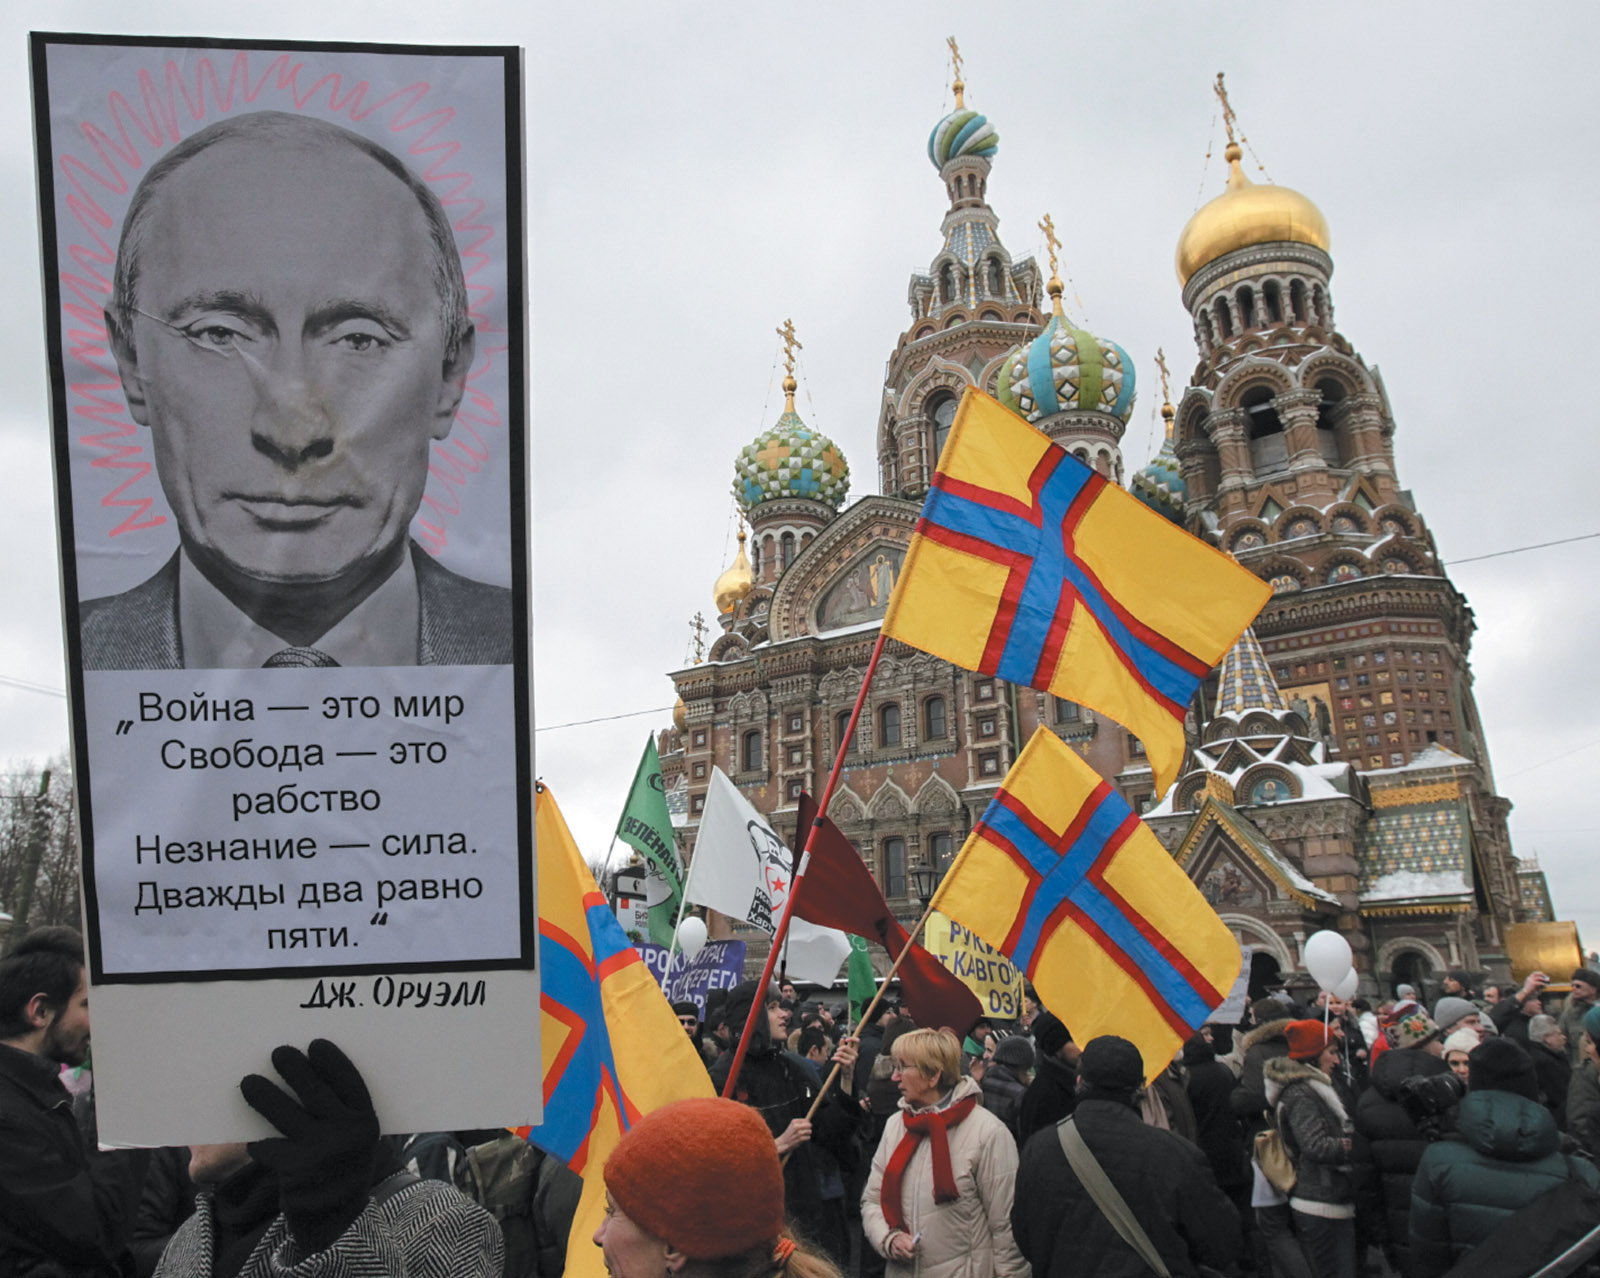 Protesters marching near the Church of the Savior on Spilled Blood, St. Petersburg, February 25, 2012. The poster on the left carries two slogans drawn from George Orwell’s 1984: ‘War is Peace, Freedom is Slavery, Ignorance is Strength,' and 'Two plus two equals five.' 